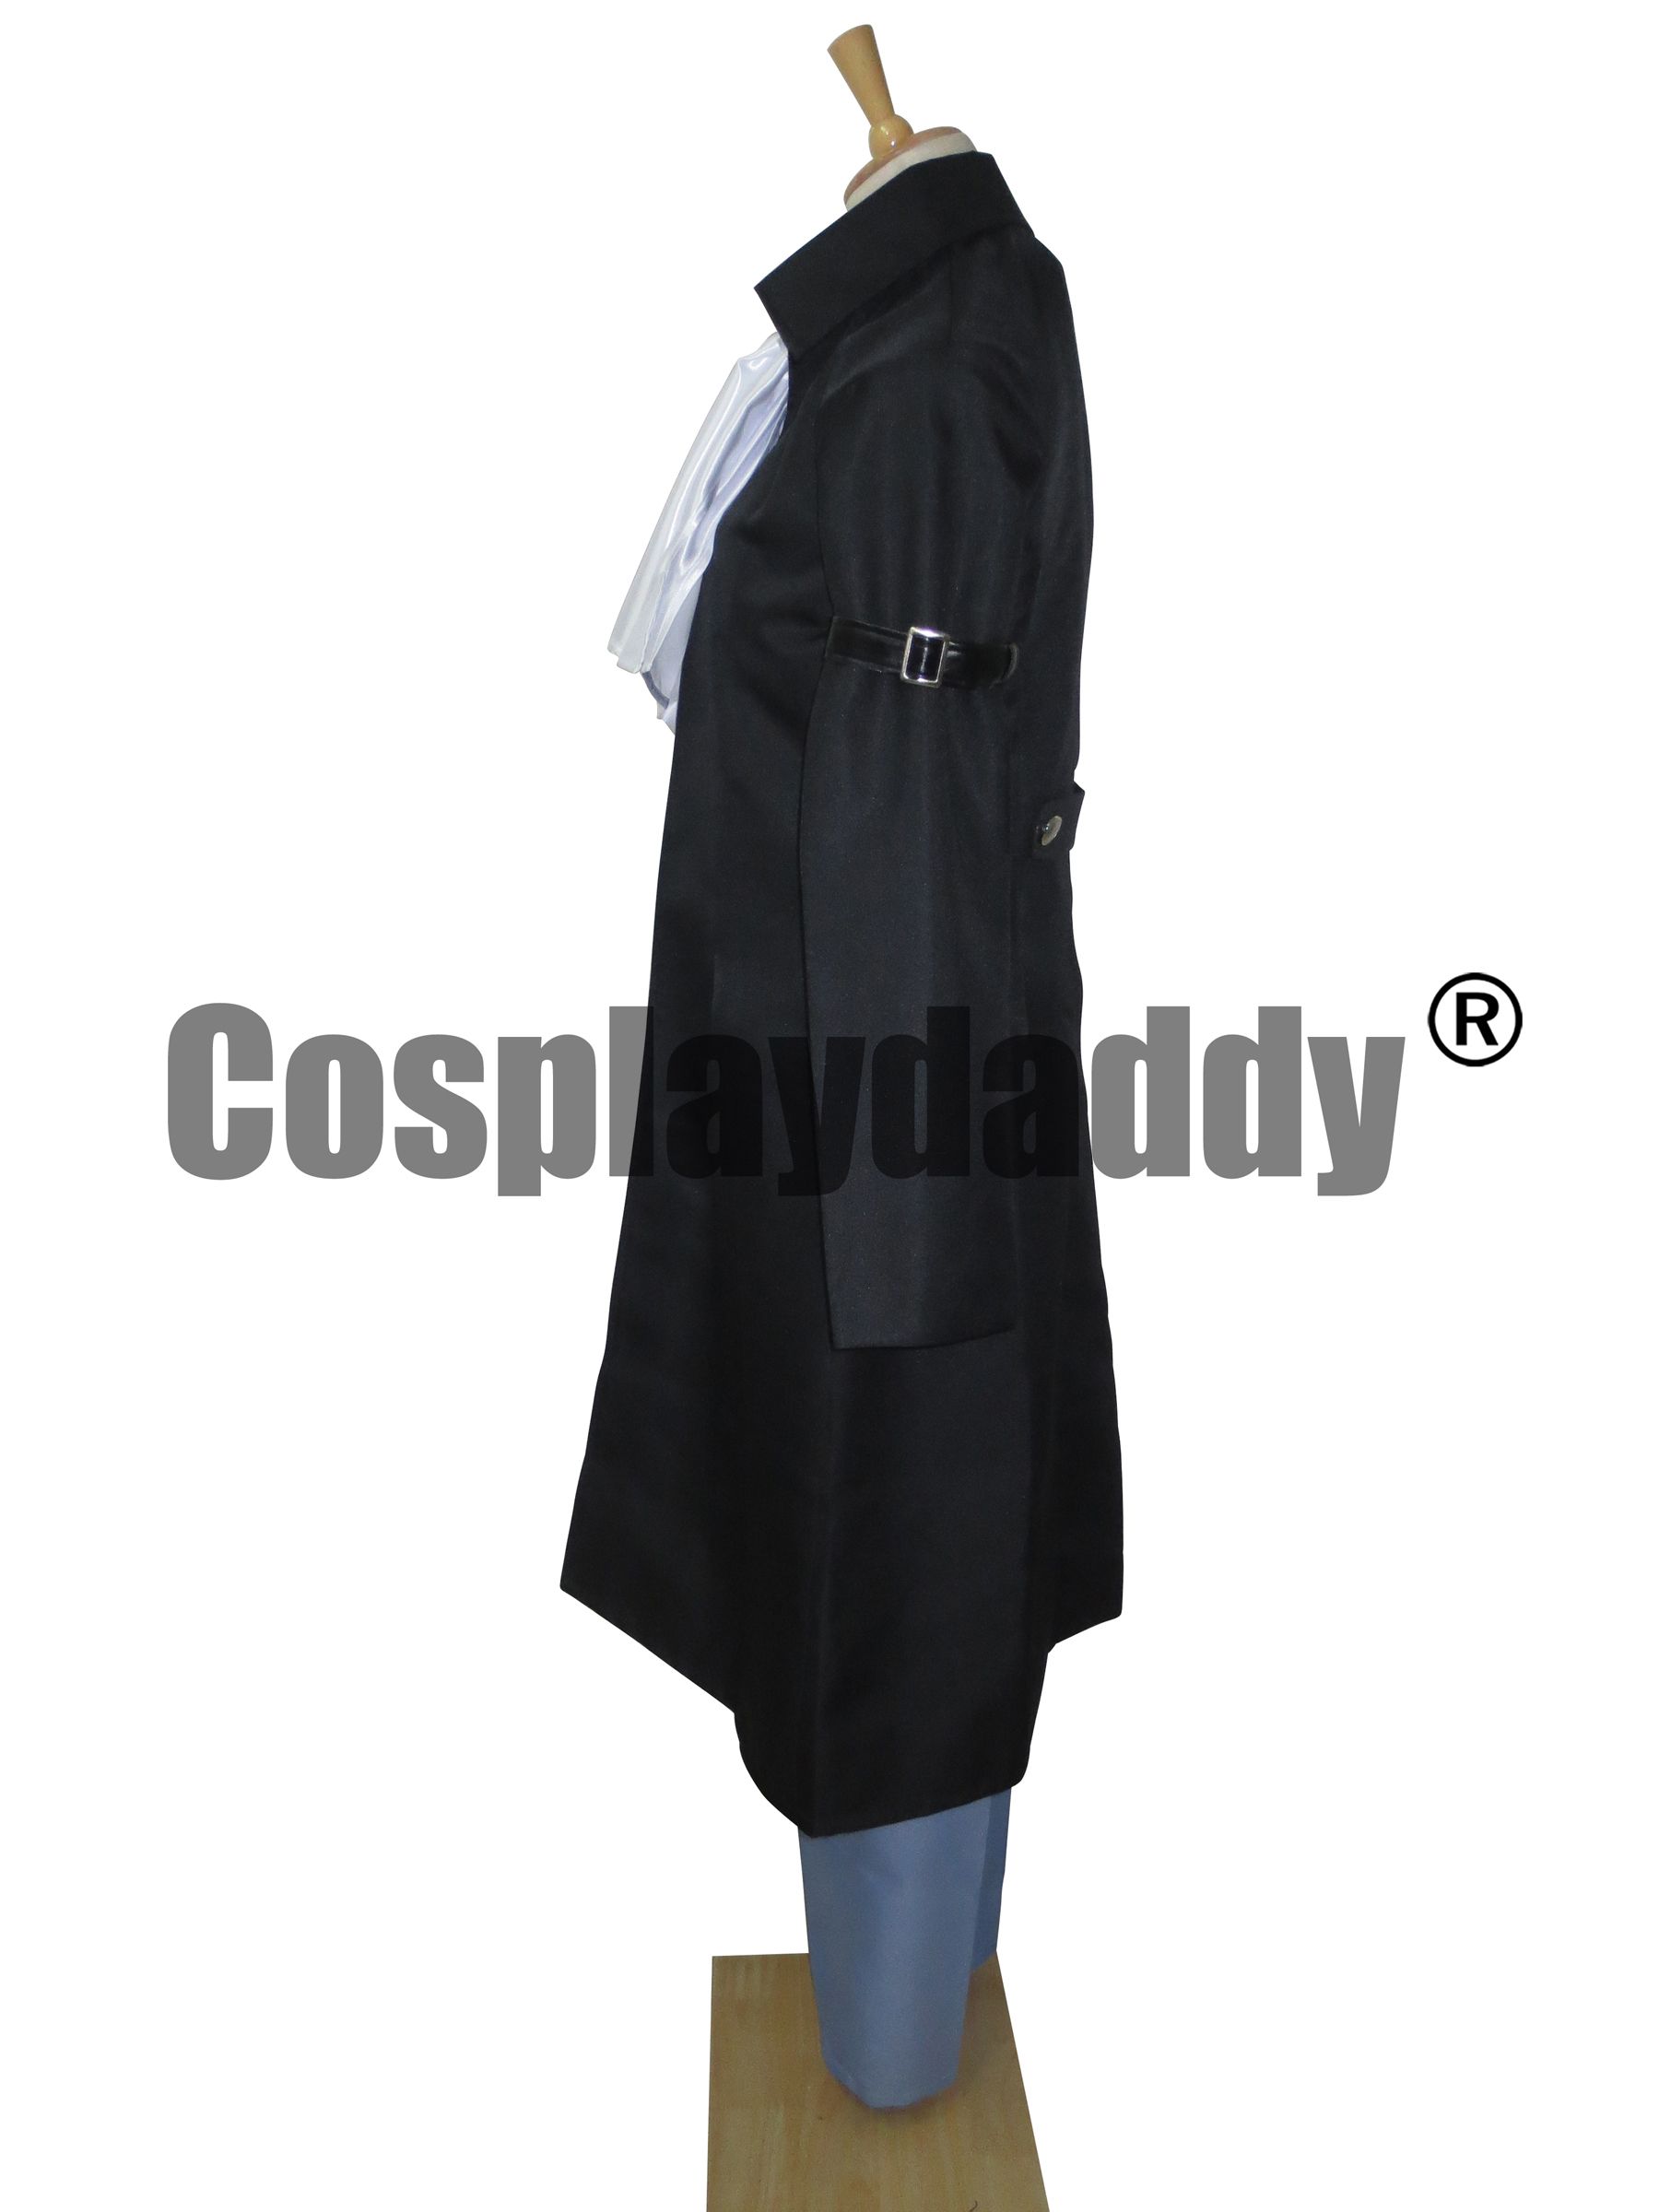 One Piece Sabo Uniform Suit Whole Set Cosplay Costume Cosplay Costumes Male Kids Cosplay Costumes From Lisacostume 106 6 Dhgate Com